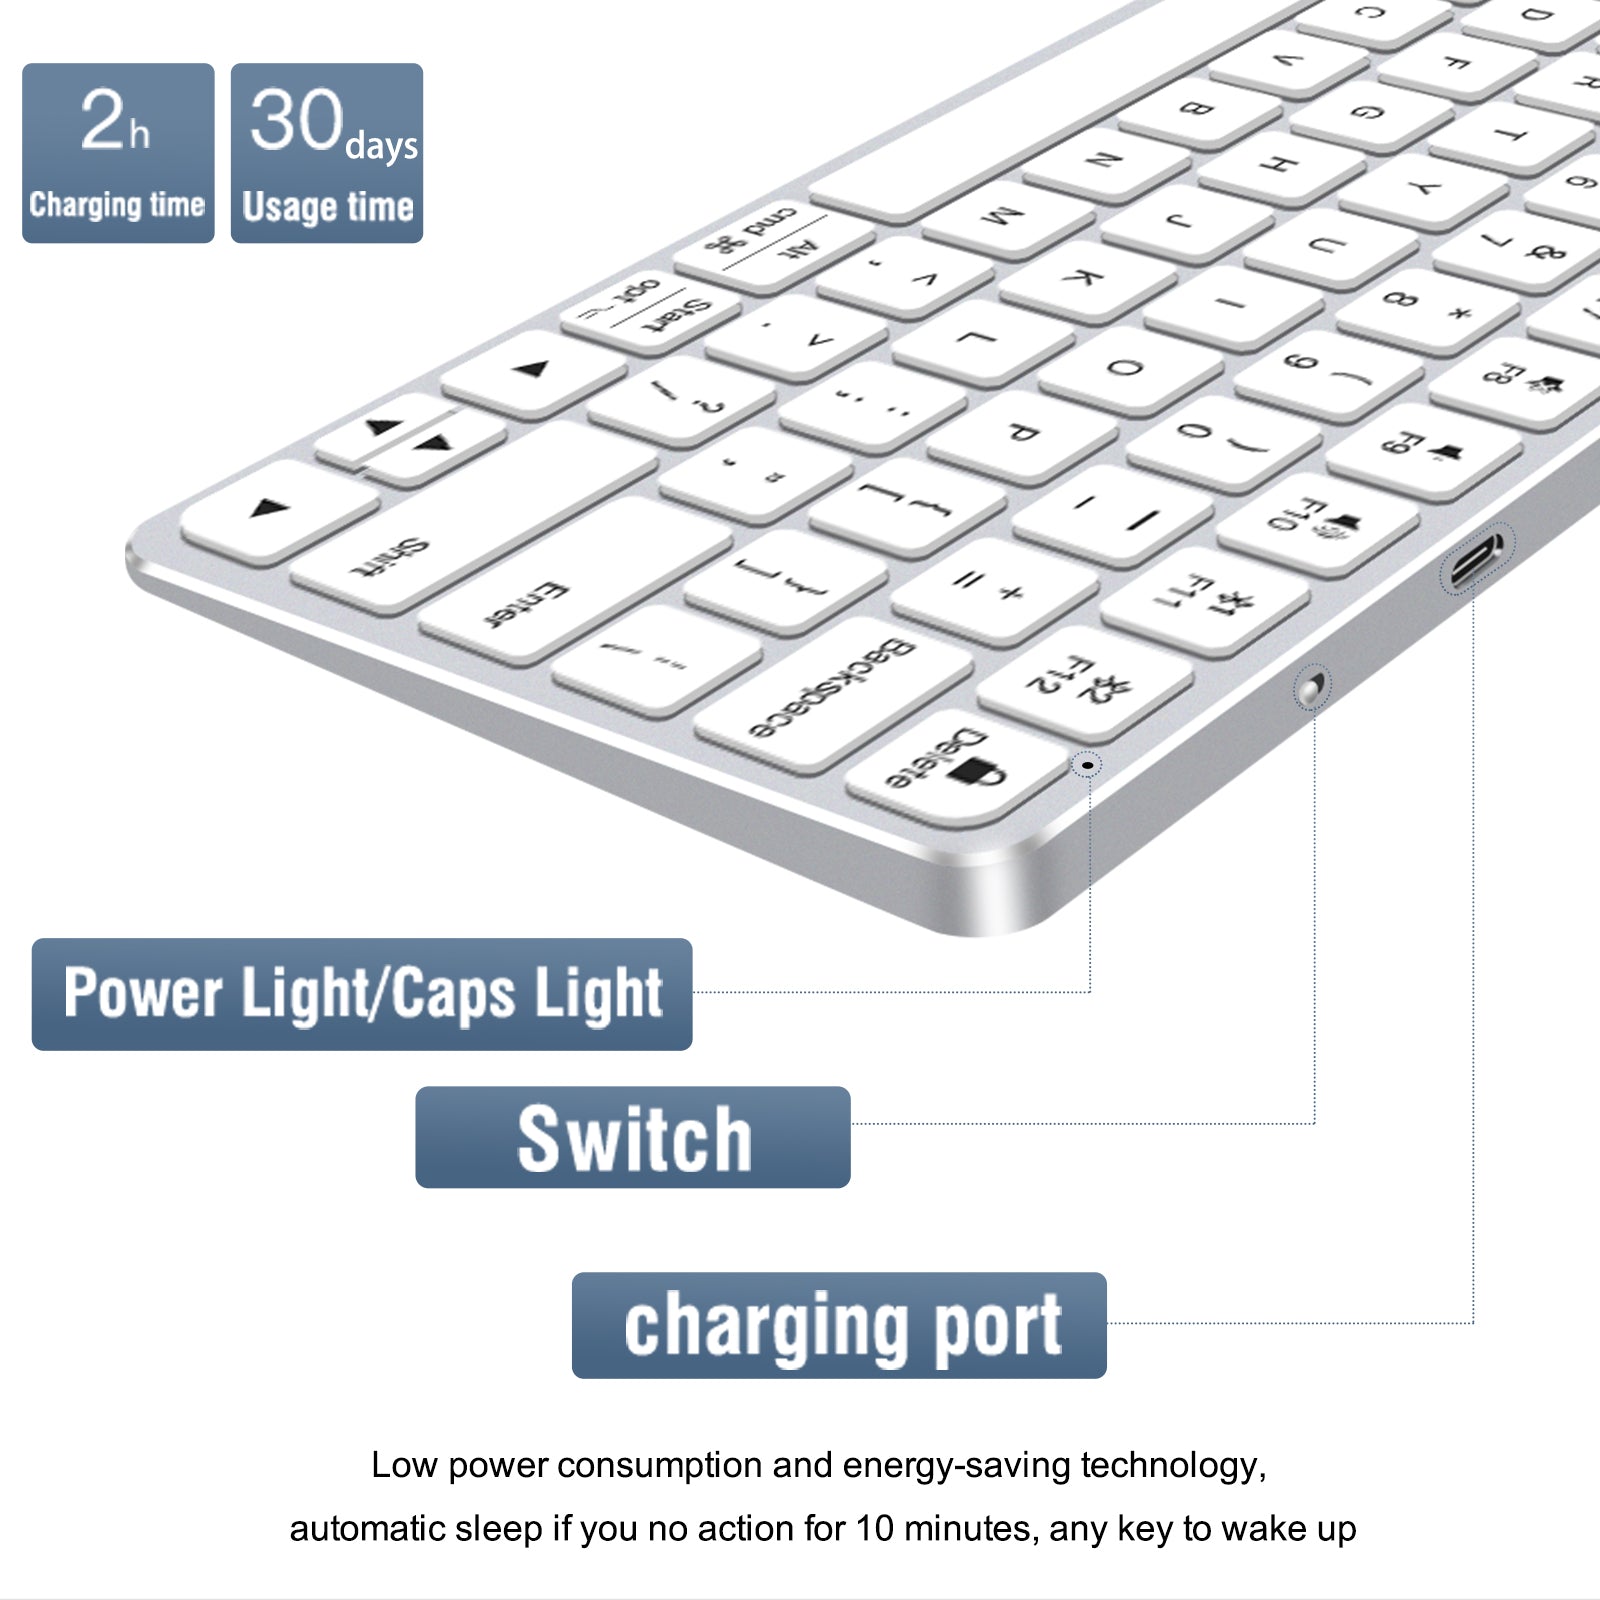 iFacemall Multi-Device Bluetooth Keyboard, Switch up to 2 Devices